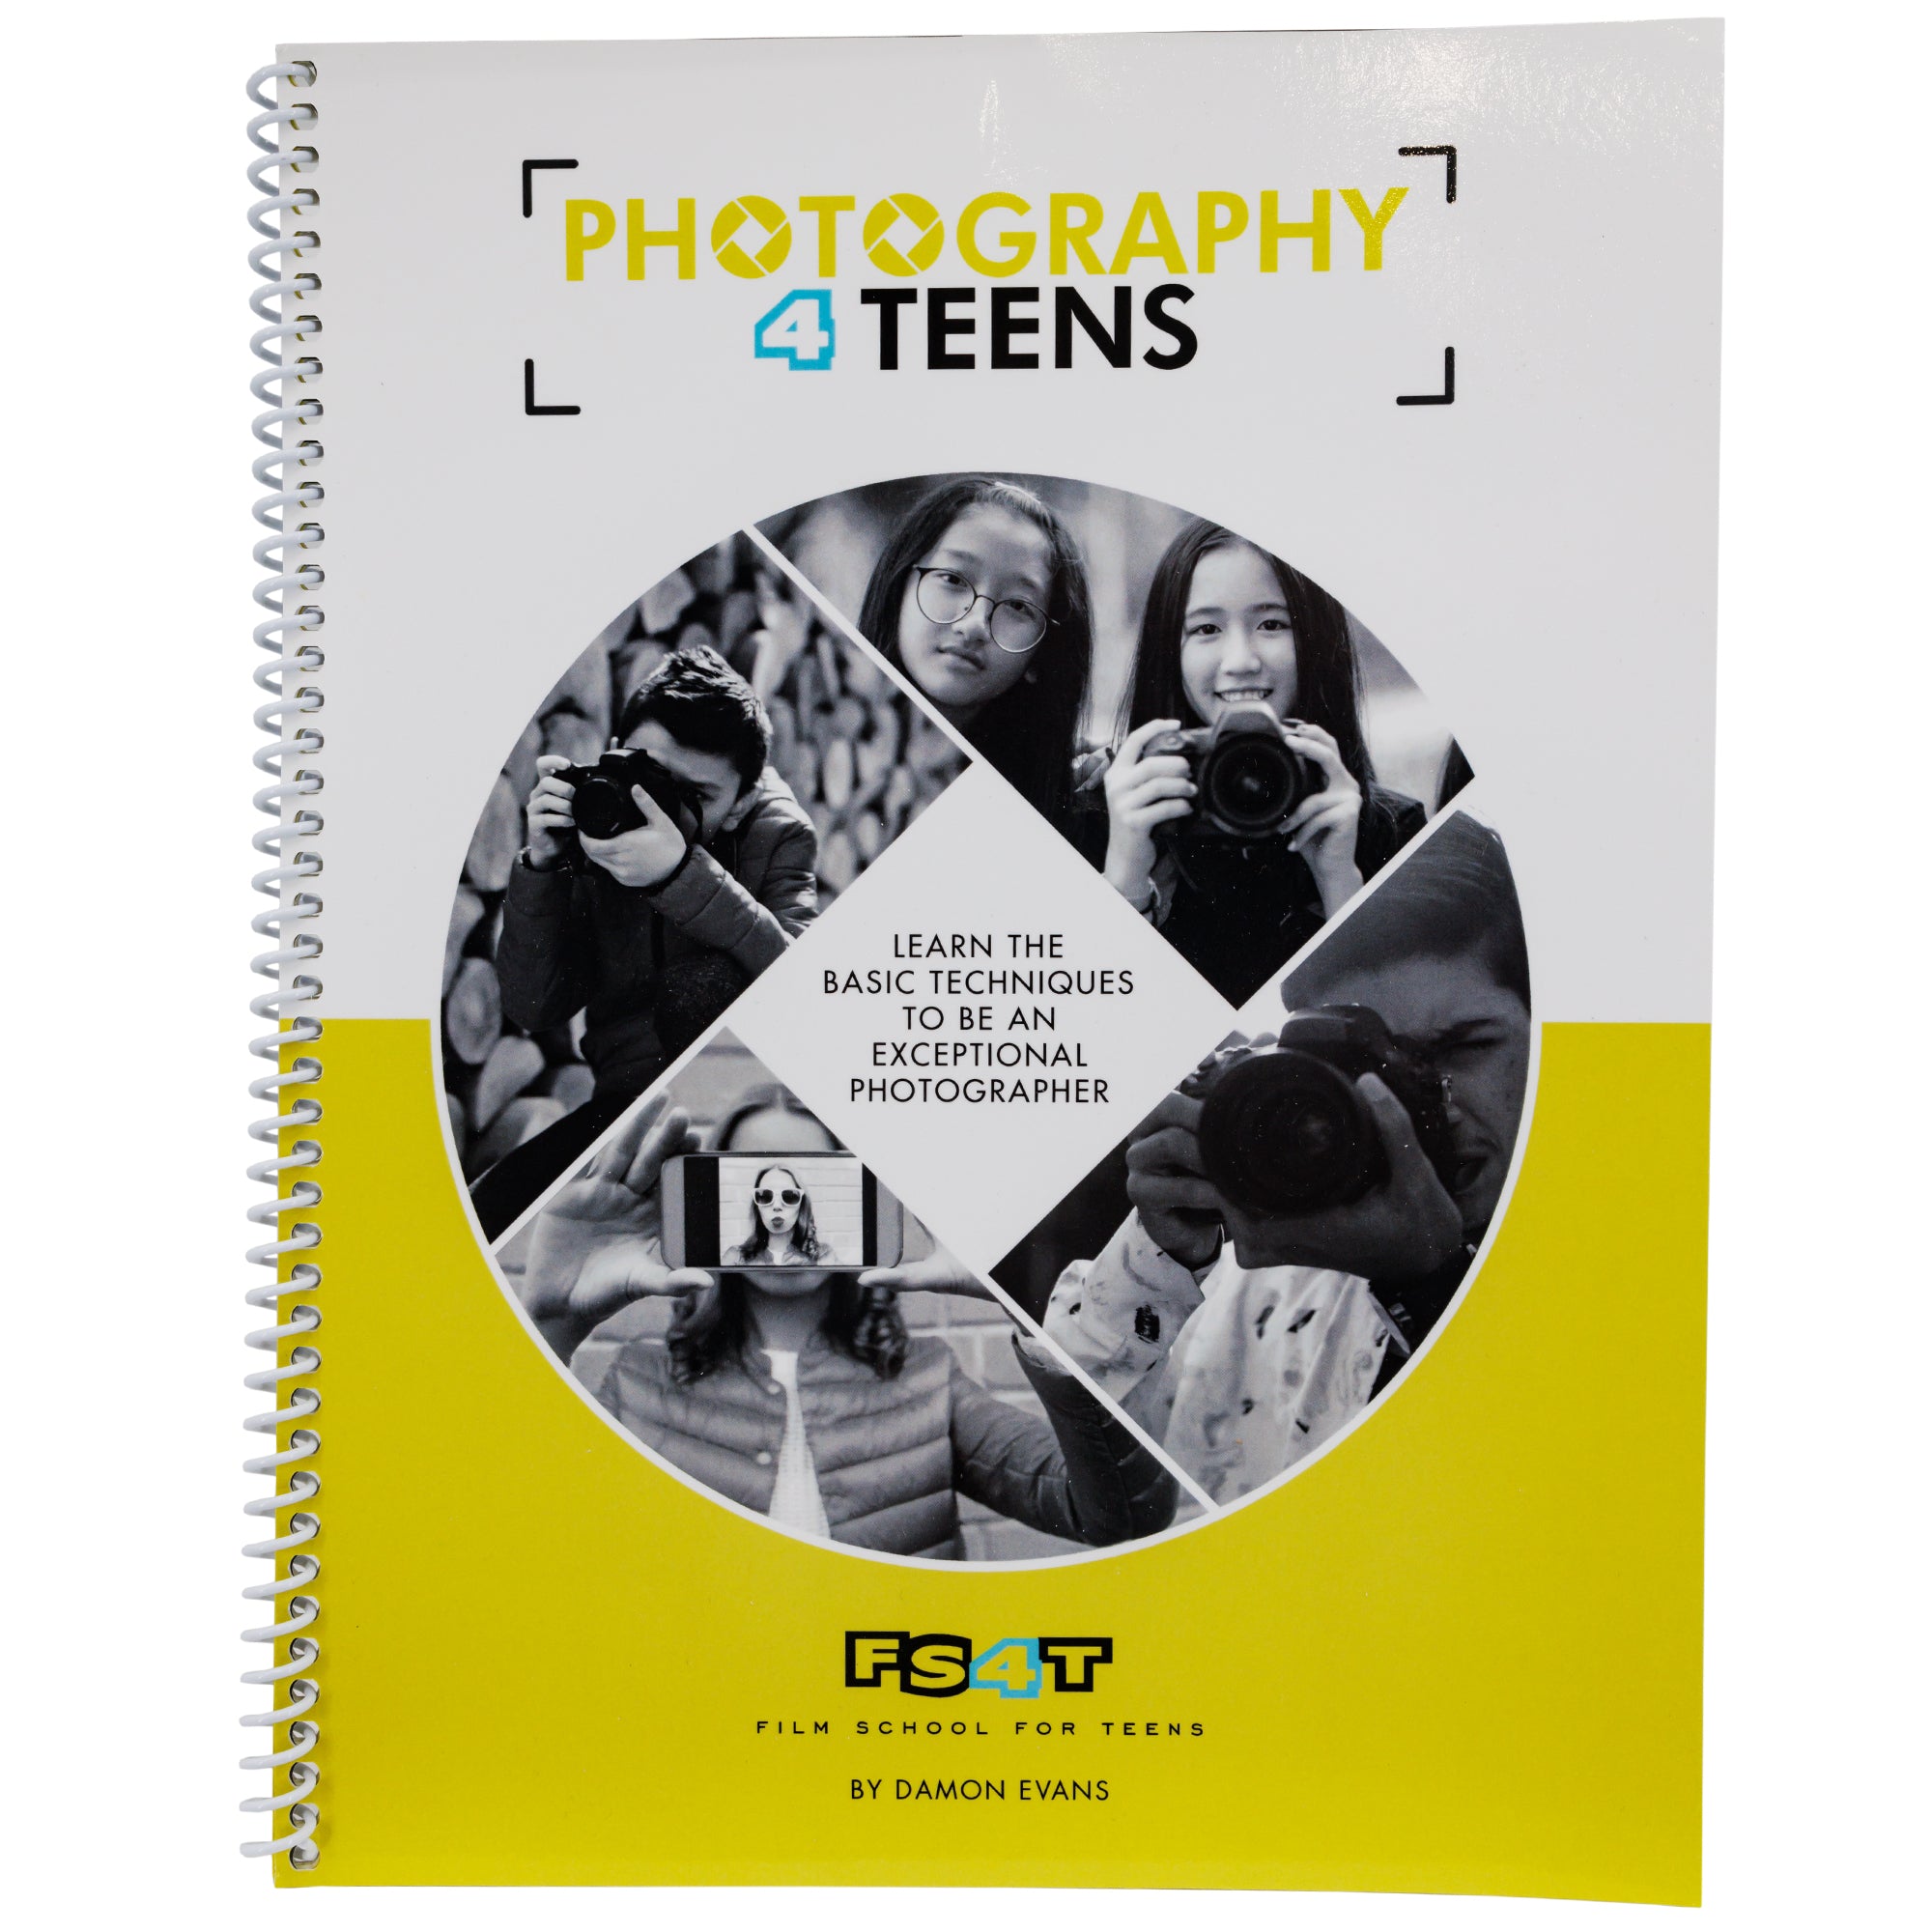 The Photography 4 Teens workbook. It has white spiral binding and the cover is half white on top and half yellowish-green on the bottom. The title is on the top and in the middle is a circle made up of pictures of teens holding up cameras. In the middle it reads "learn the basic techniques to be an exceptional photographer."